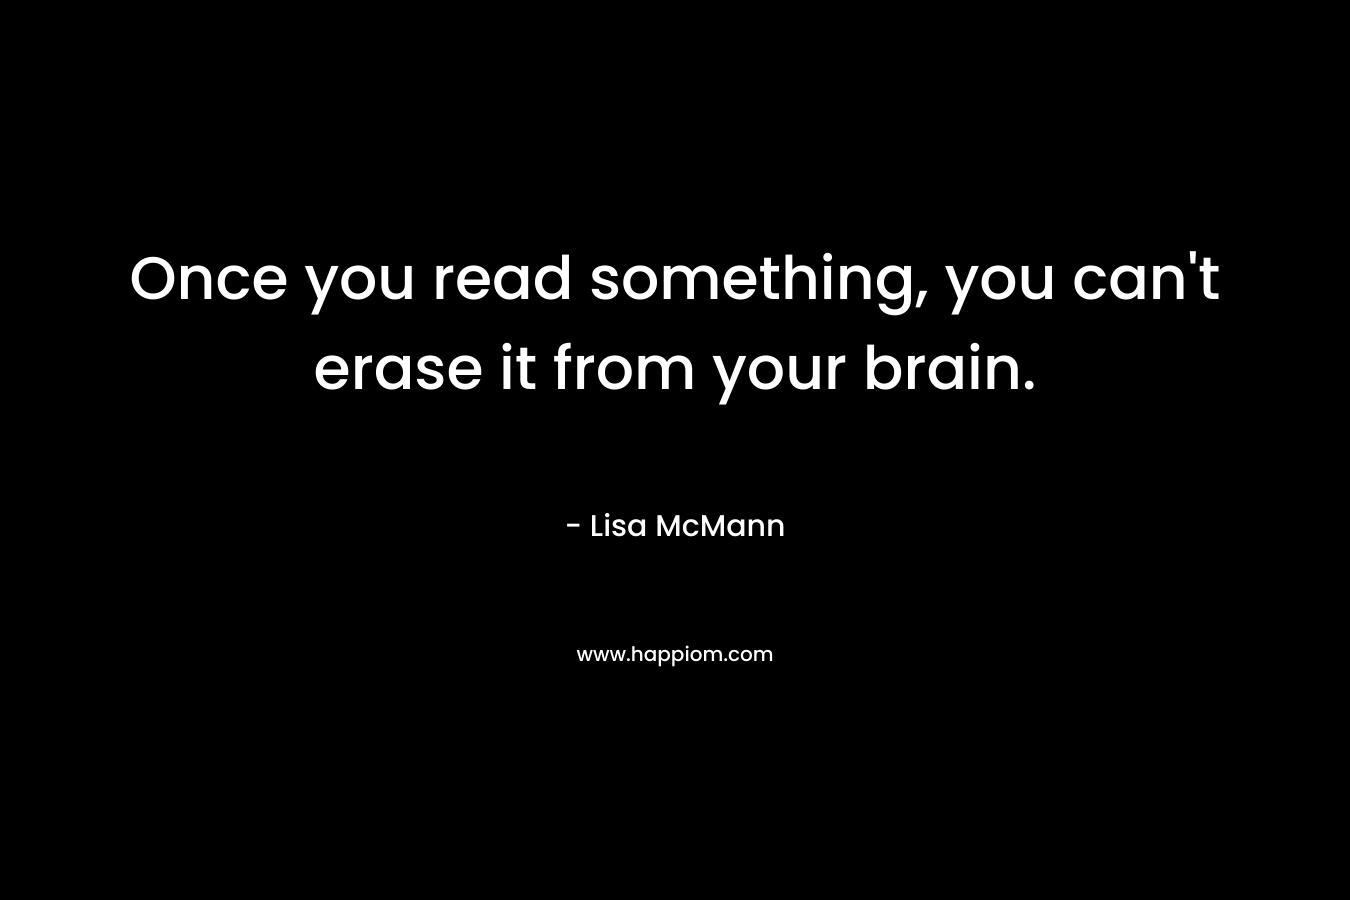 Once you read something, you can't erase it from your brain.